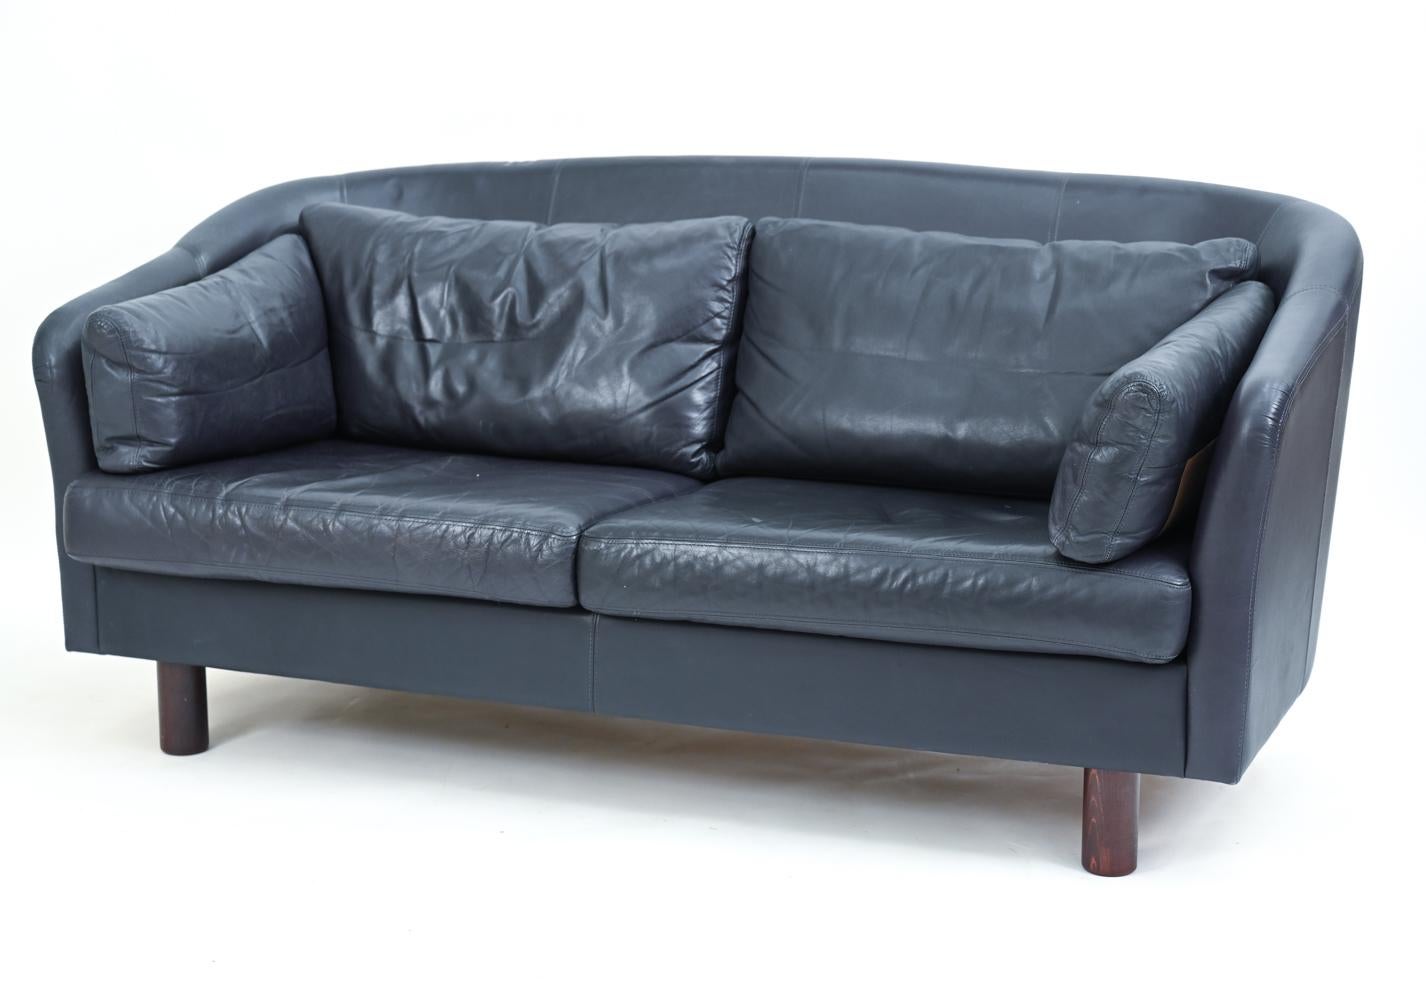 Pair of Swedish Modern Leather Sofas by Dux, c. 1970's 2